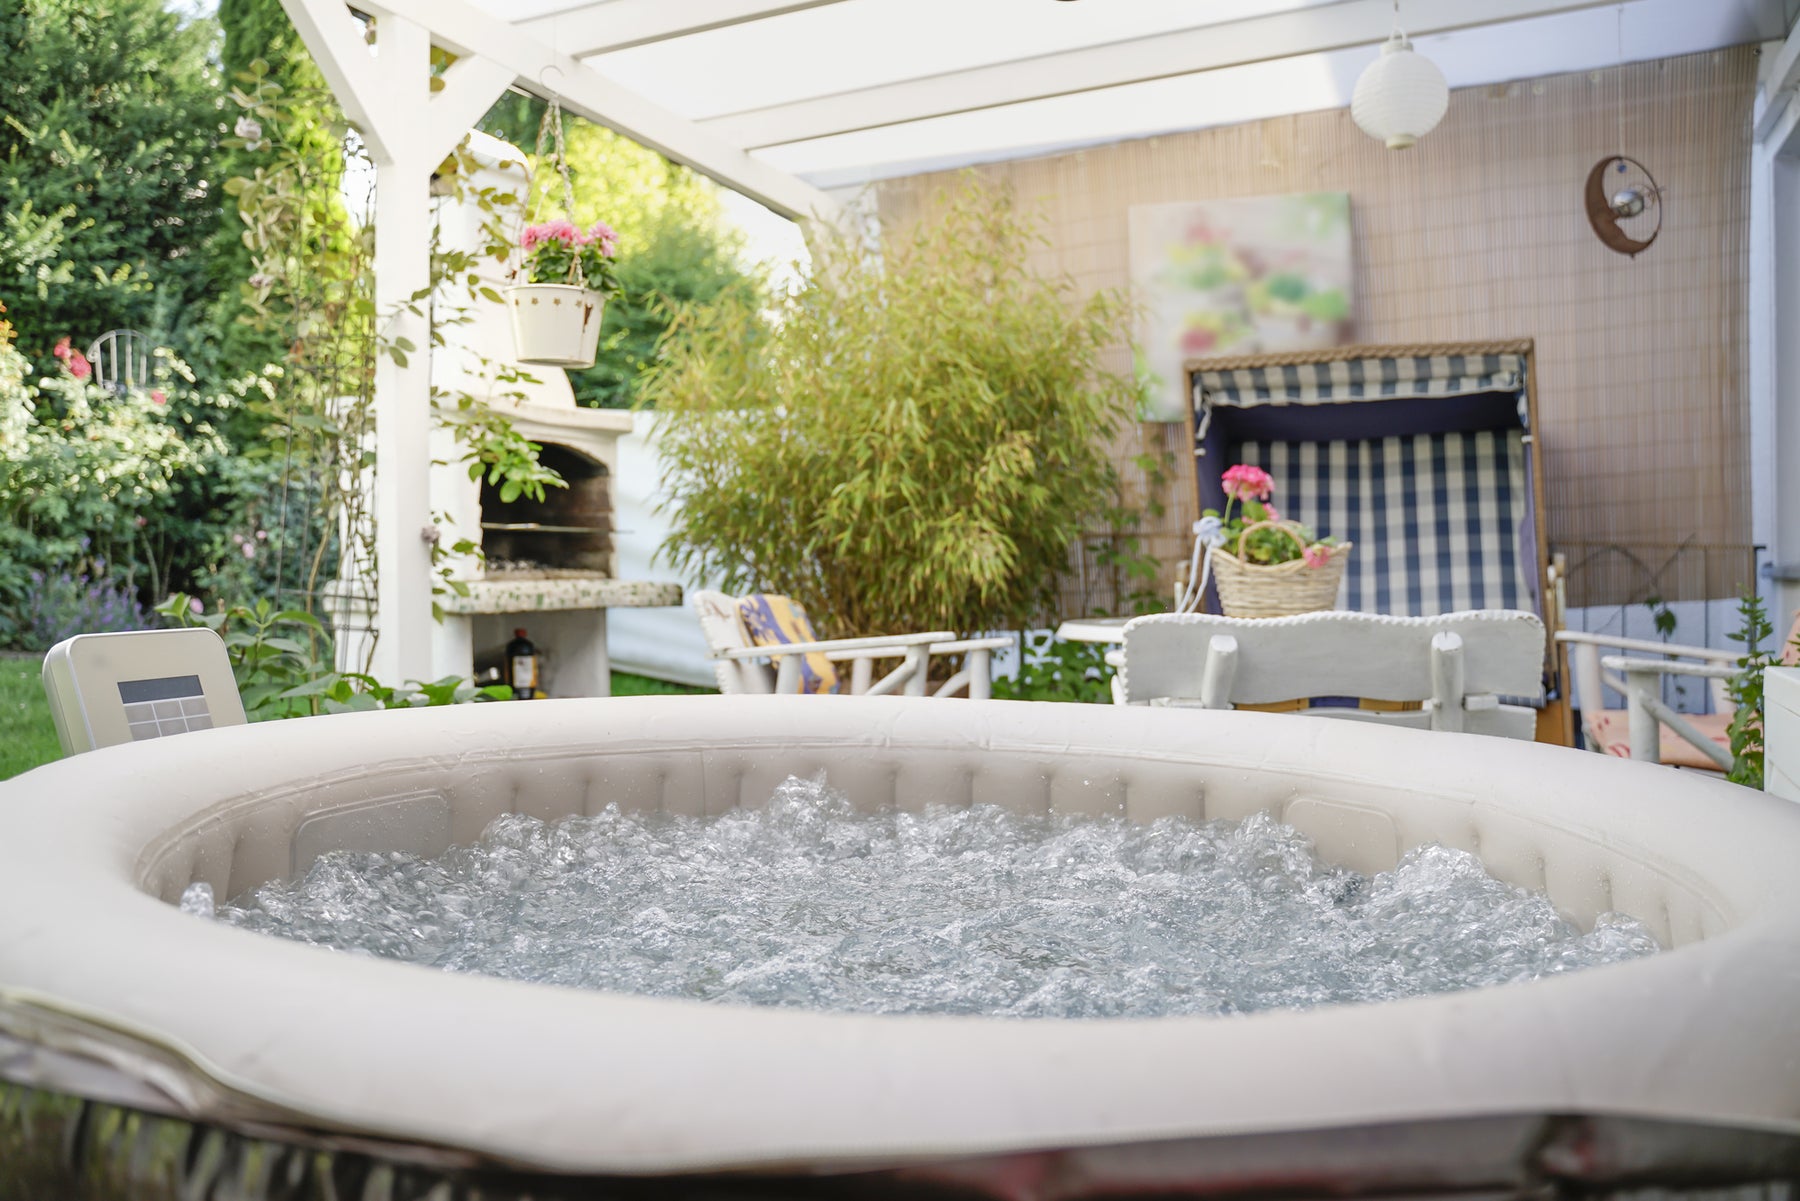 7 Hot Tub Maintenance Tips for Homeowners